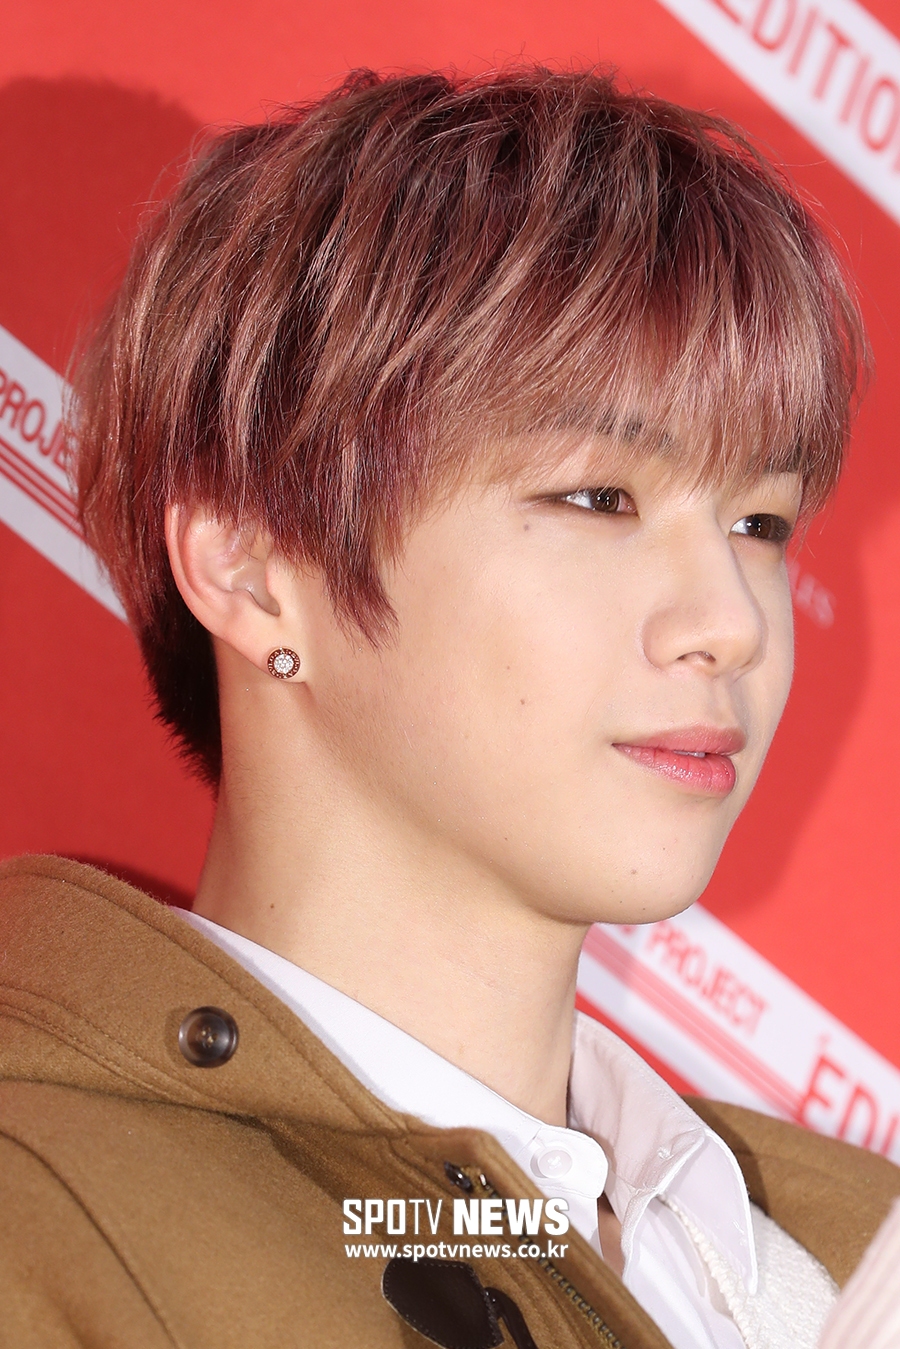 The group Wanna One member Kang Daniel Fan signing event event ceremony was held at the Shufigen Hall in Samseong-dong, Gangnam-gu, Seoul on the afternoon of the 17th.